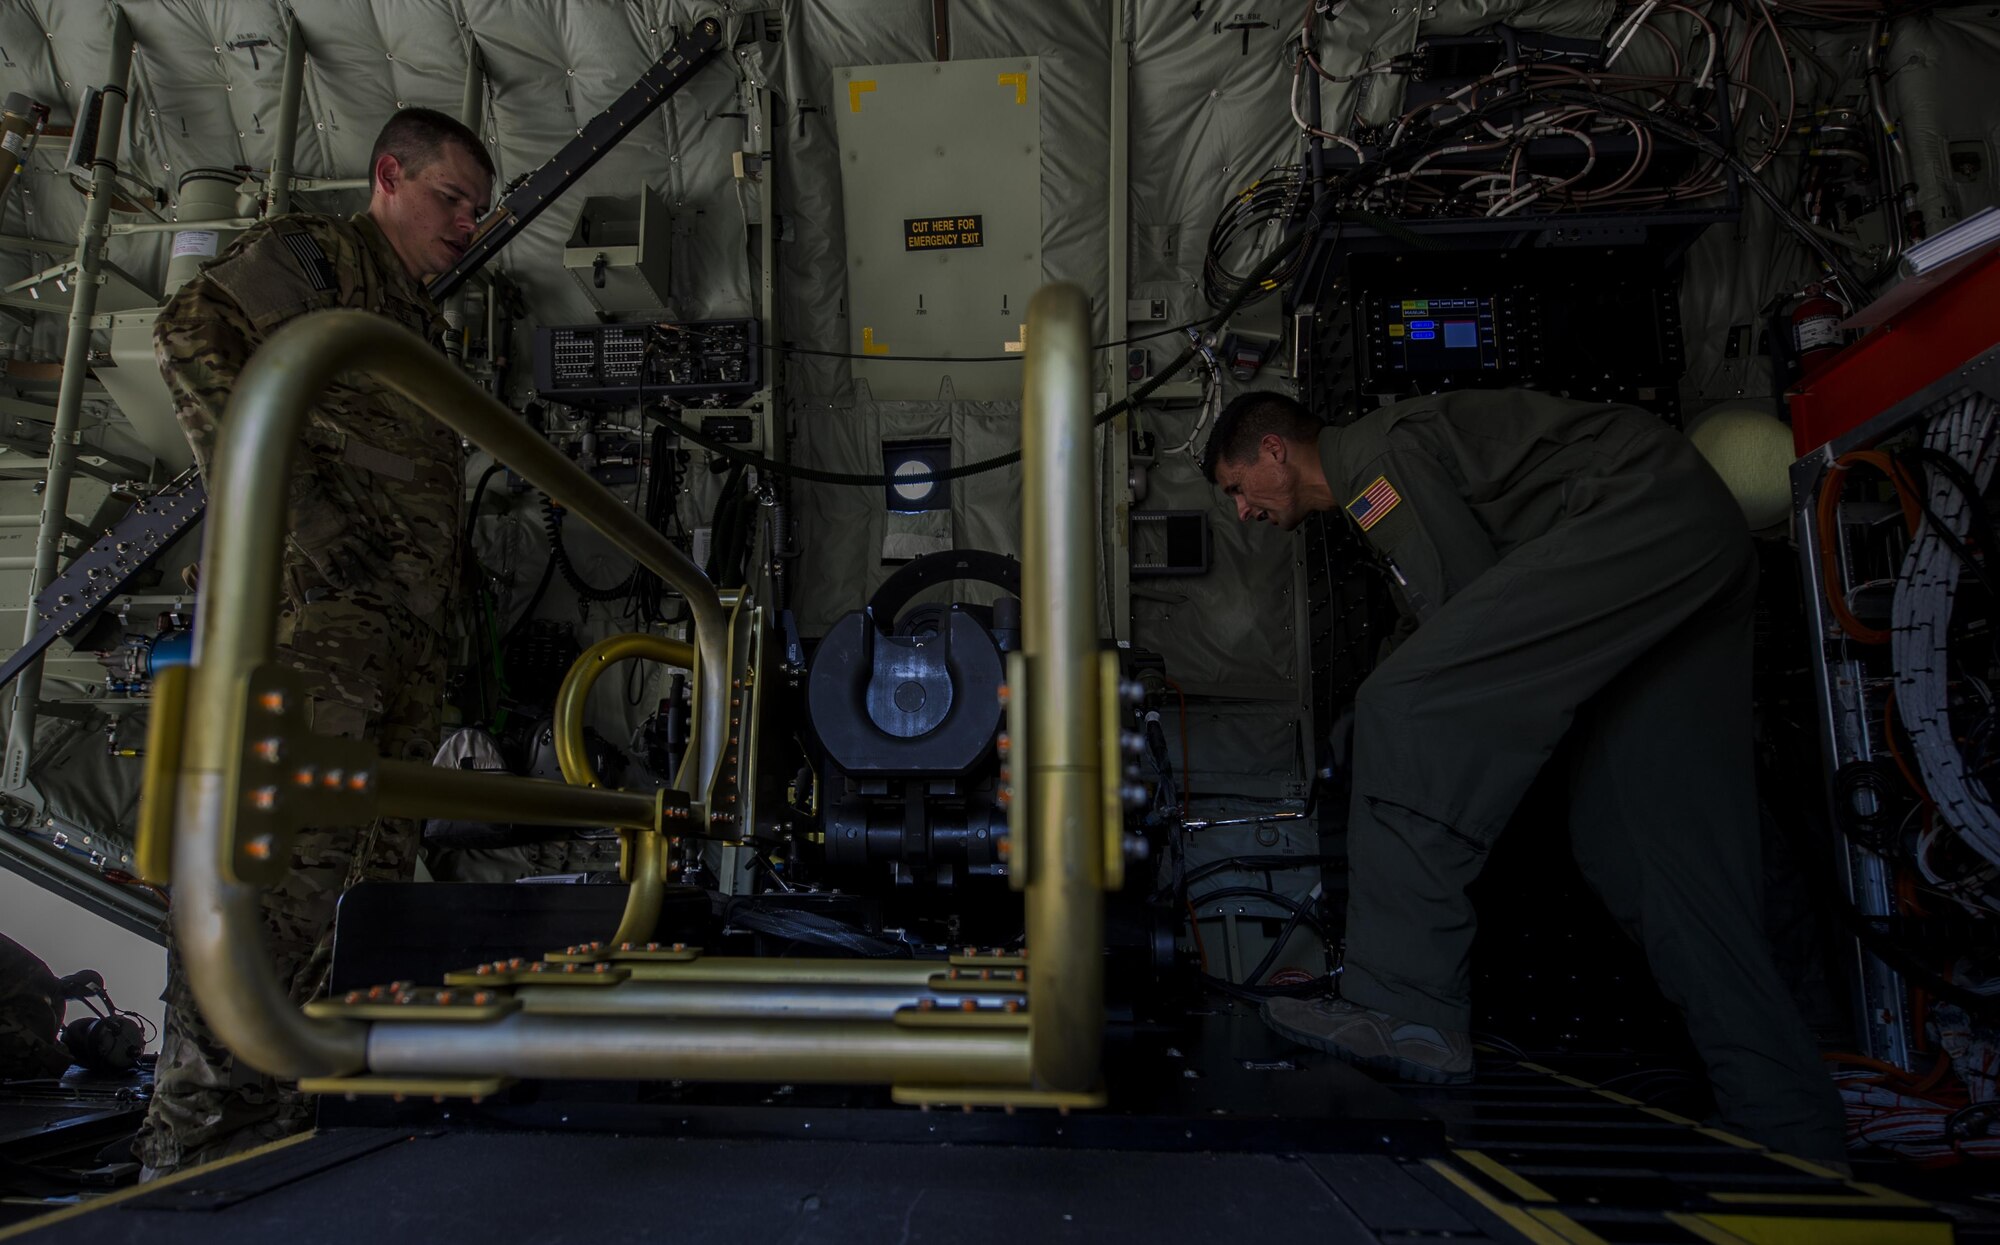 Tech. Sgt. Johnny Hooker and Staff Sgt. Oscar Garcia, aerial gunners with the 1st Special Operations Group Detachment 2, conduct pre-flight inspections of a 105 mm weapon system onboard an AC-130J Ghostrider gunship at Hurlburt Field, Fla., Sept. 8 2016. Pre-flight inspections are performed to ensure the aircraft and its systems are in good condition to fly and perform the mission. (U.S. Air Force photo by Airman 1st Class Isaac O. Guest IV)